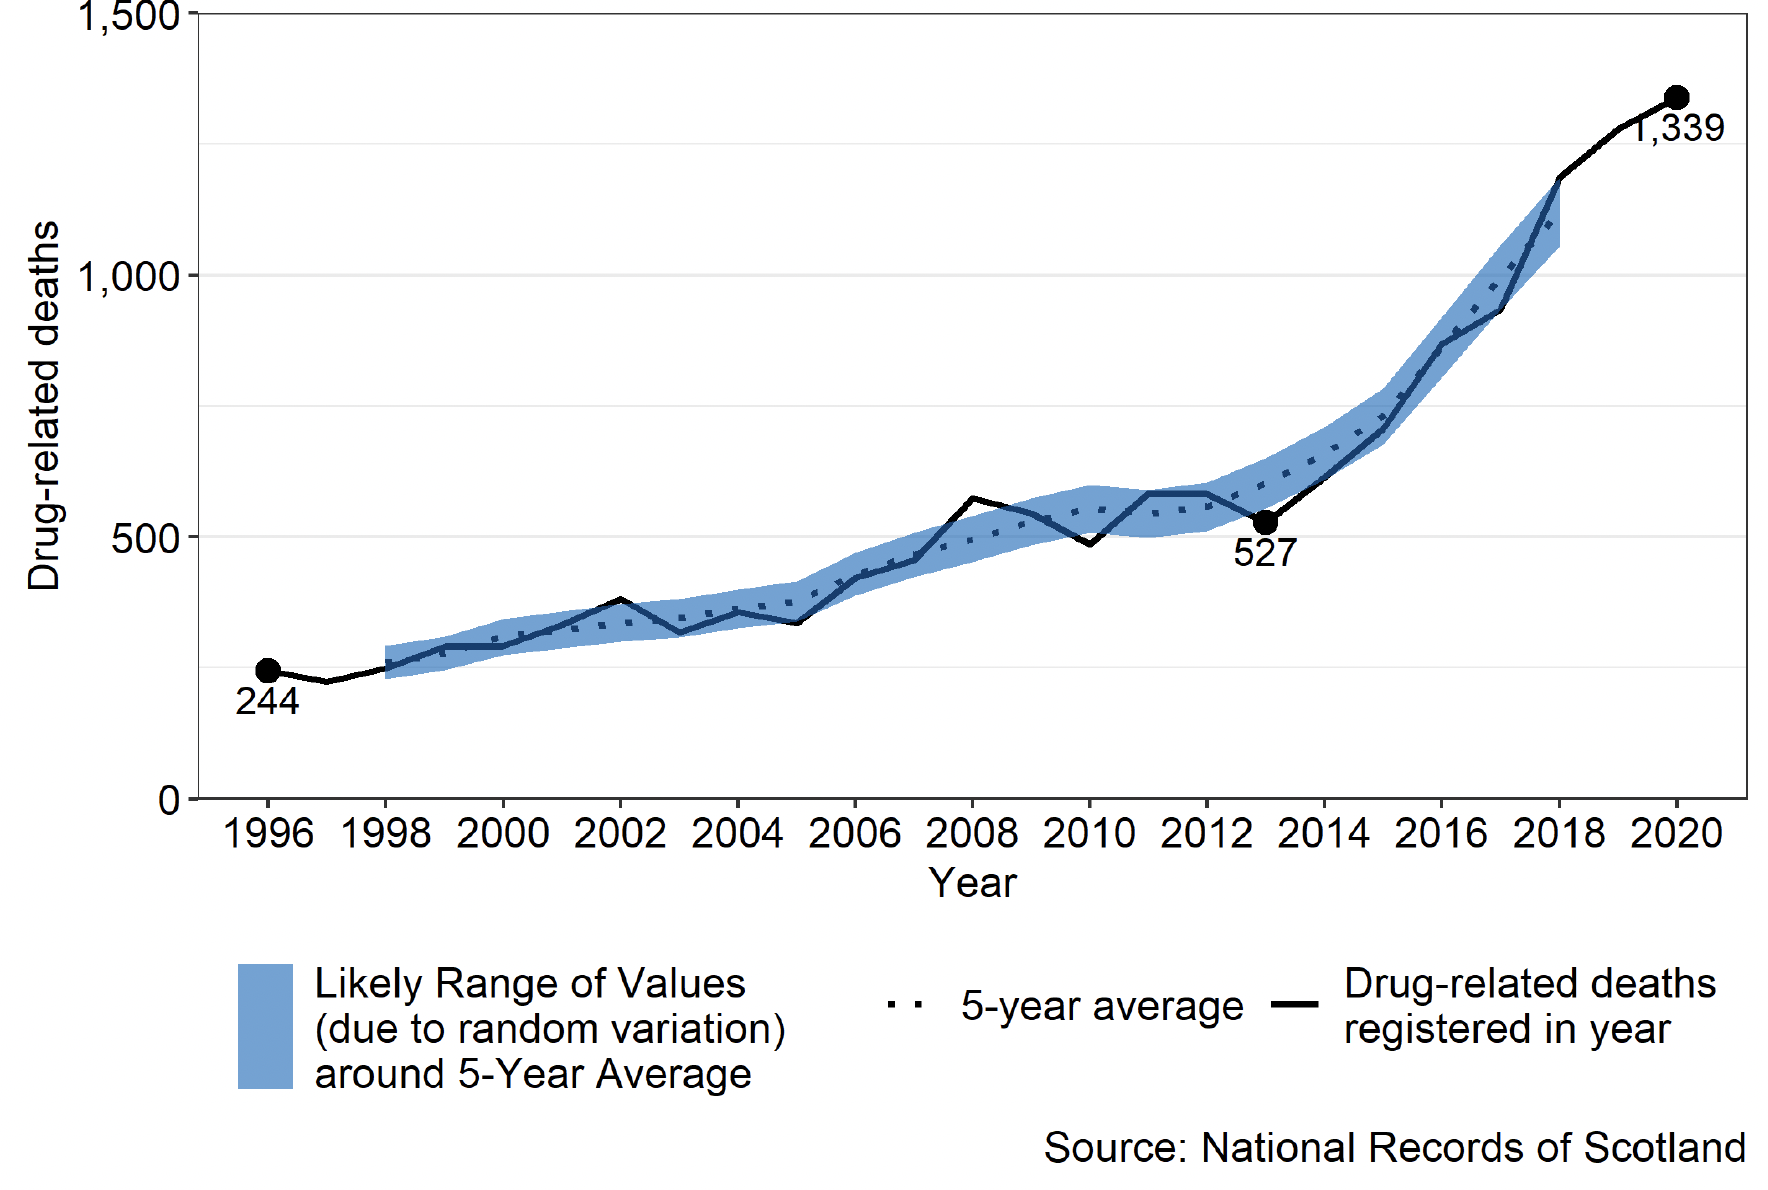 Line Graph showing the number of drug related deaths over time, 5-year average and likely range of values (due to random variation) around 5-year average